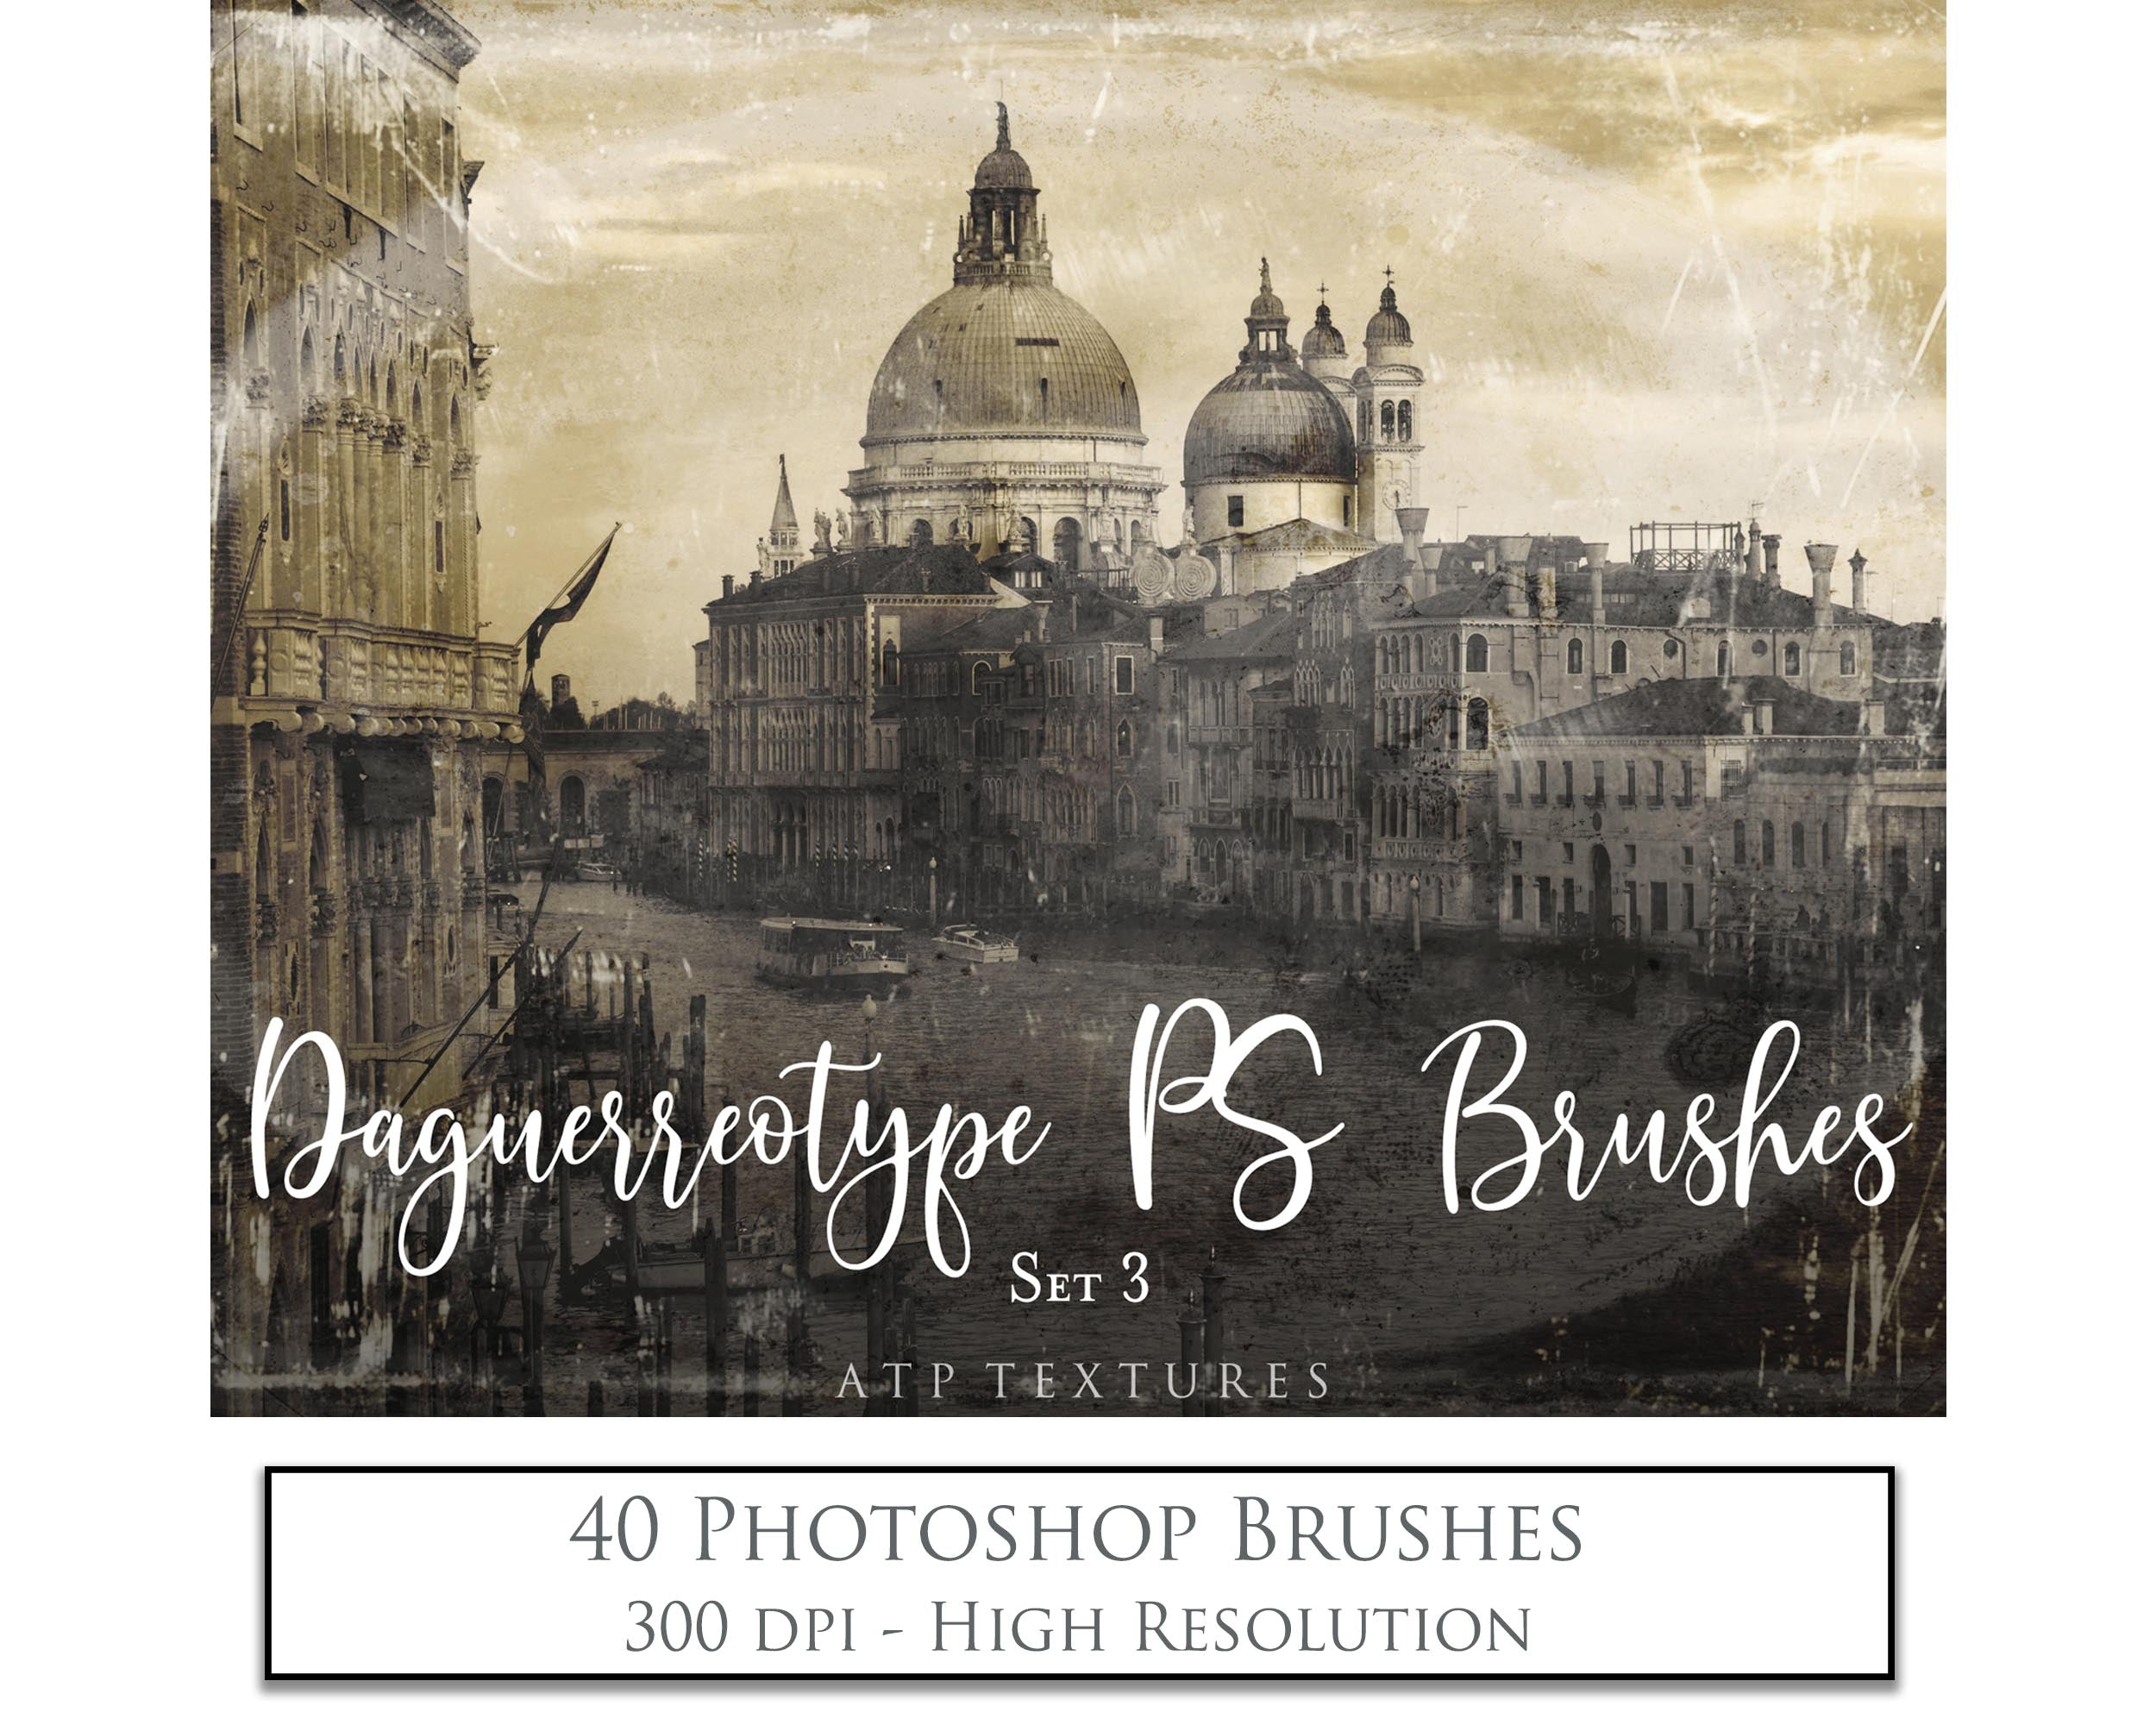 Vintage daguerreau Photoshop Brushes includes 40 high resolution frames and textures, all different and unique! Photoshop brushes with overlays for photography and digital design. Digital Stamps for scrapbooking, old aged photo edits. Realistic fine art assets and Add ons. ATP Textures